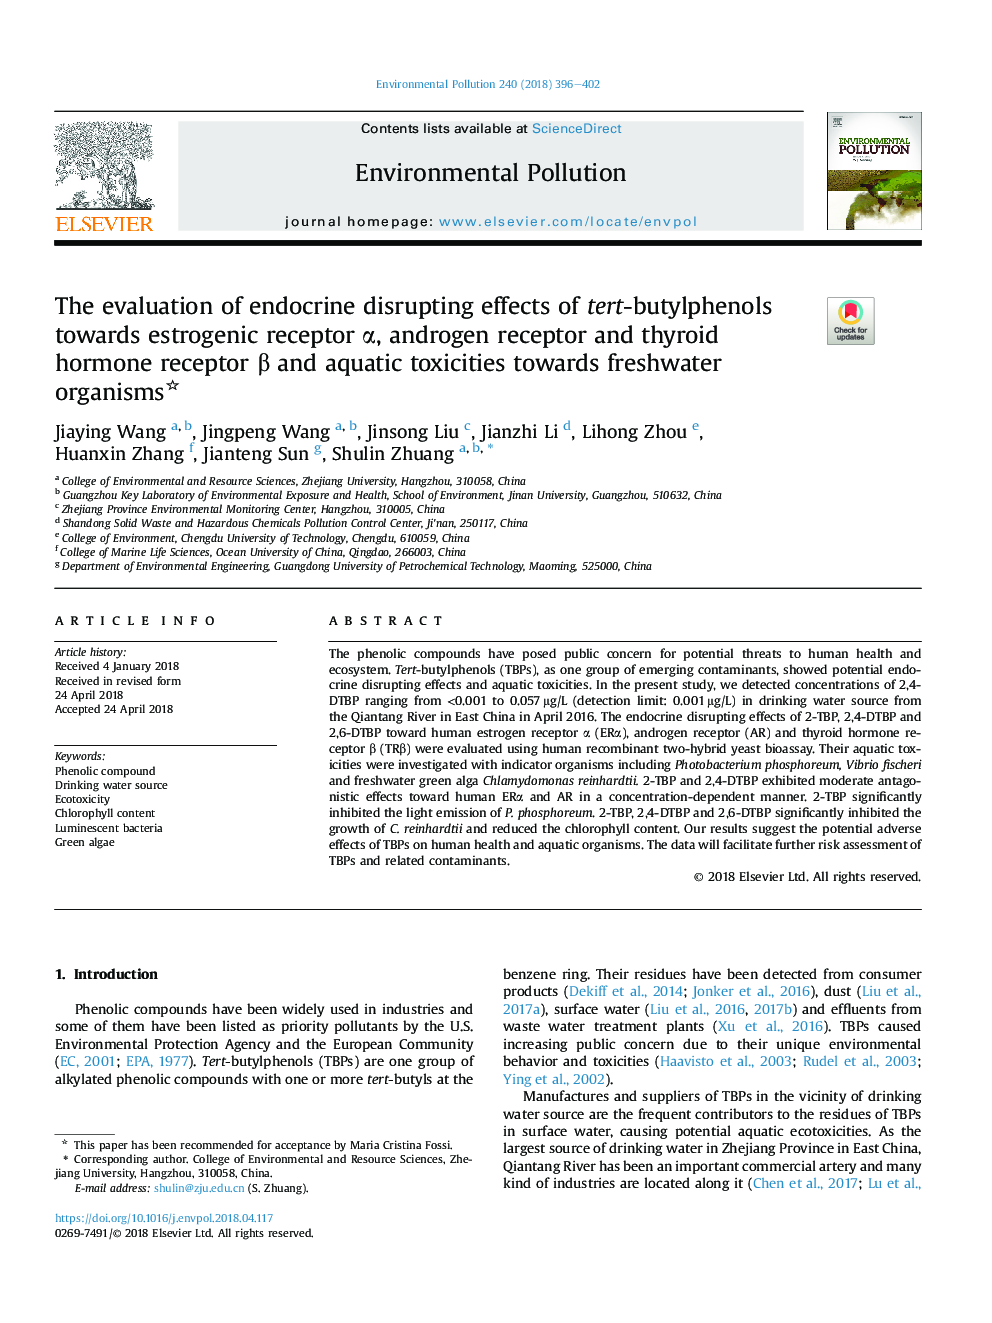 The evaluation of endocrine disrupting effects of tert-butylphenols towards estrogenic receptor Î±, androgen receptor and thyroid hormone receptor Î² and aquatic toxicities towards freshwater organisms